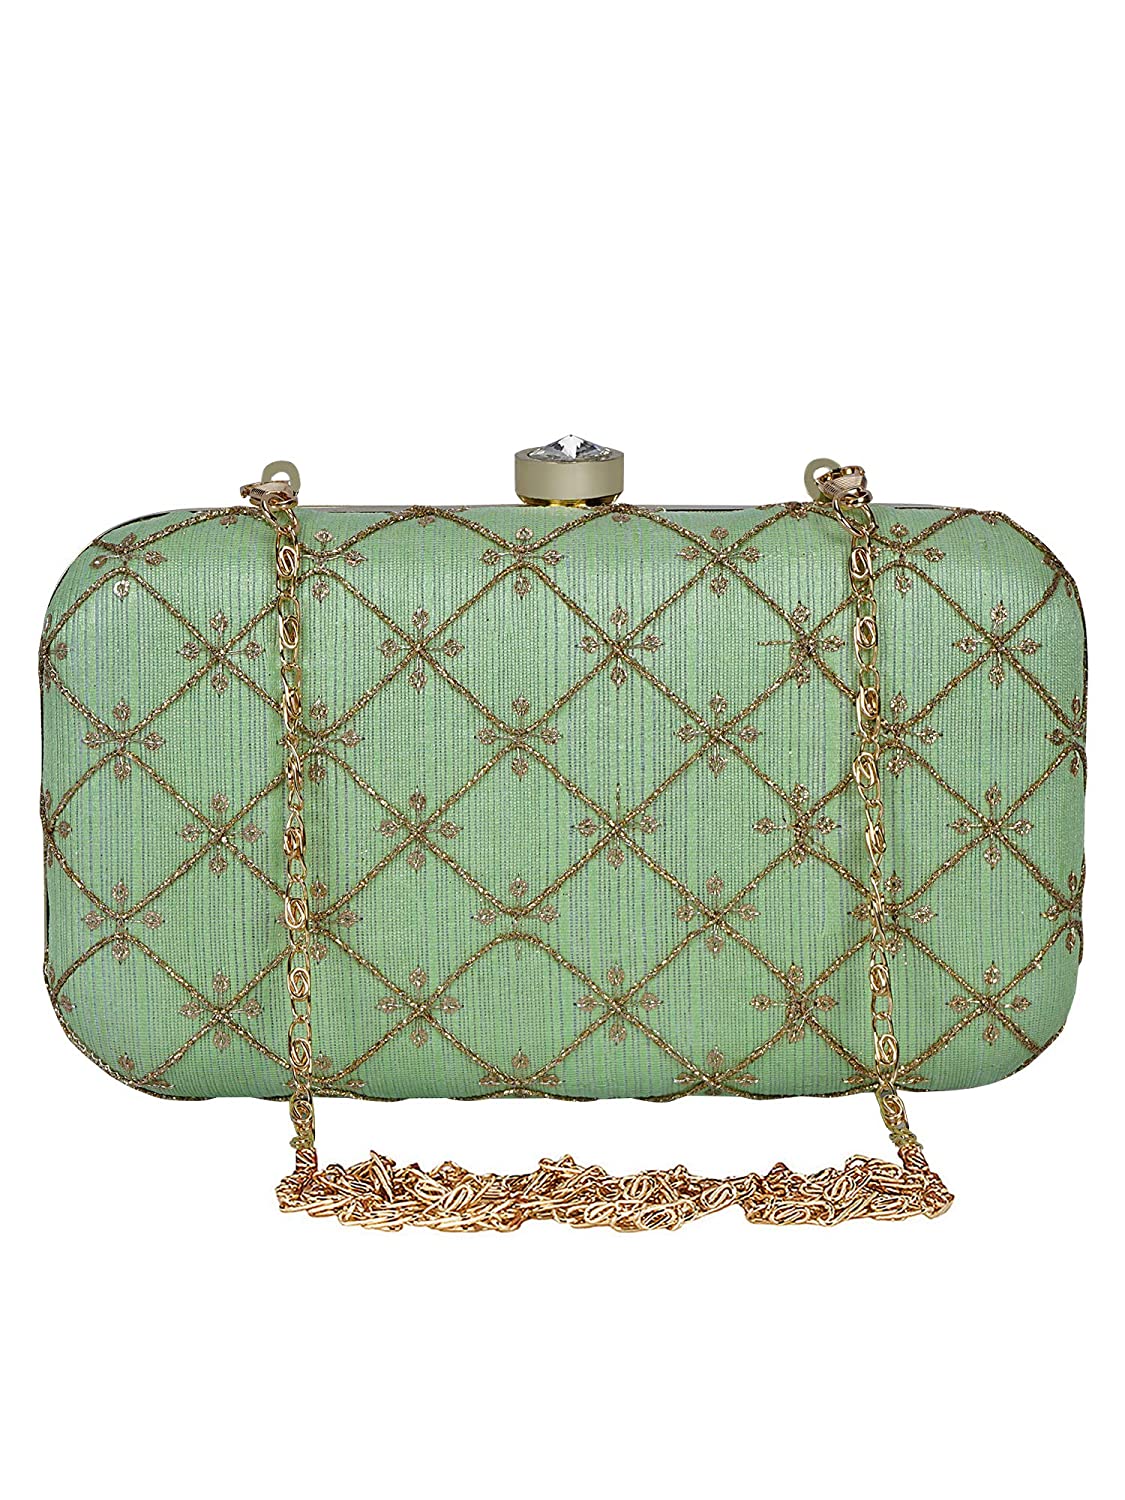 Women's Green Color tulle Embroidered Faux Silk Clutch - VASTANS